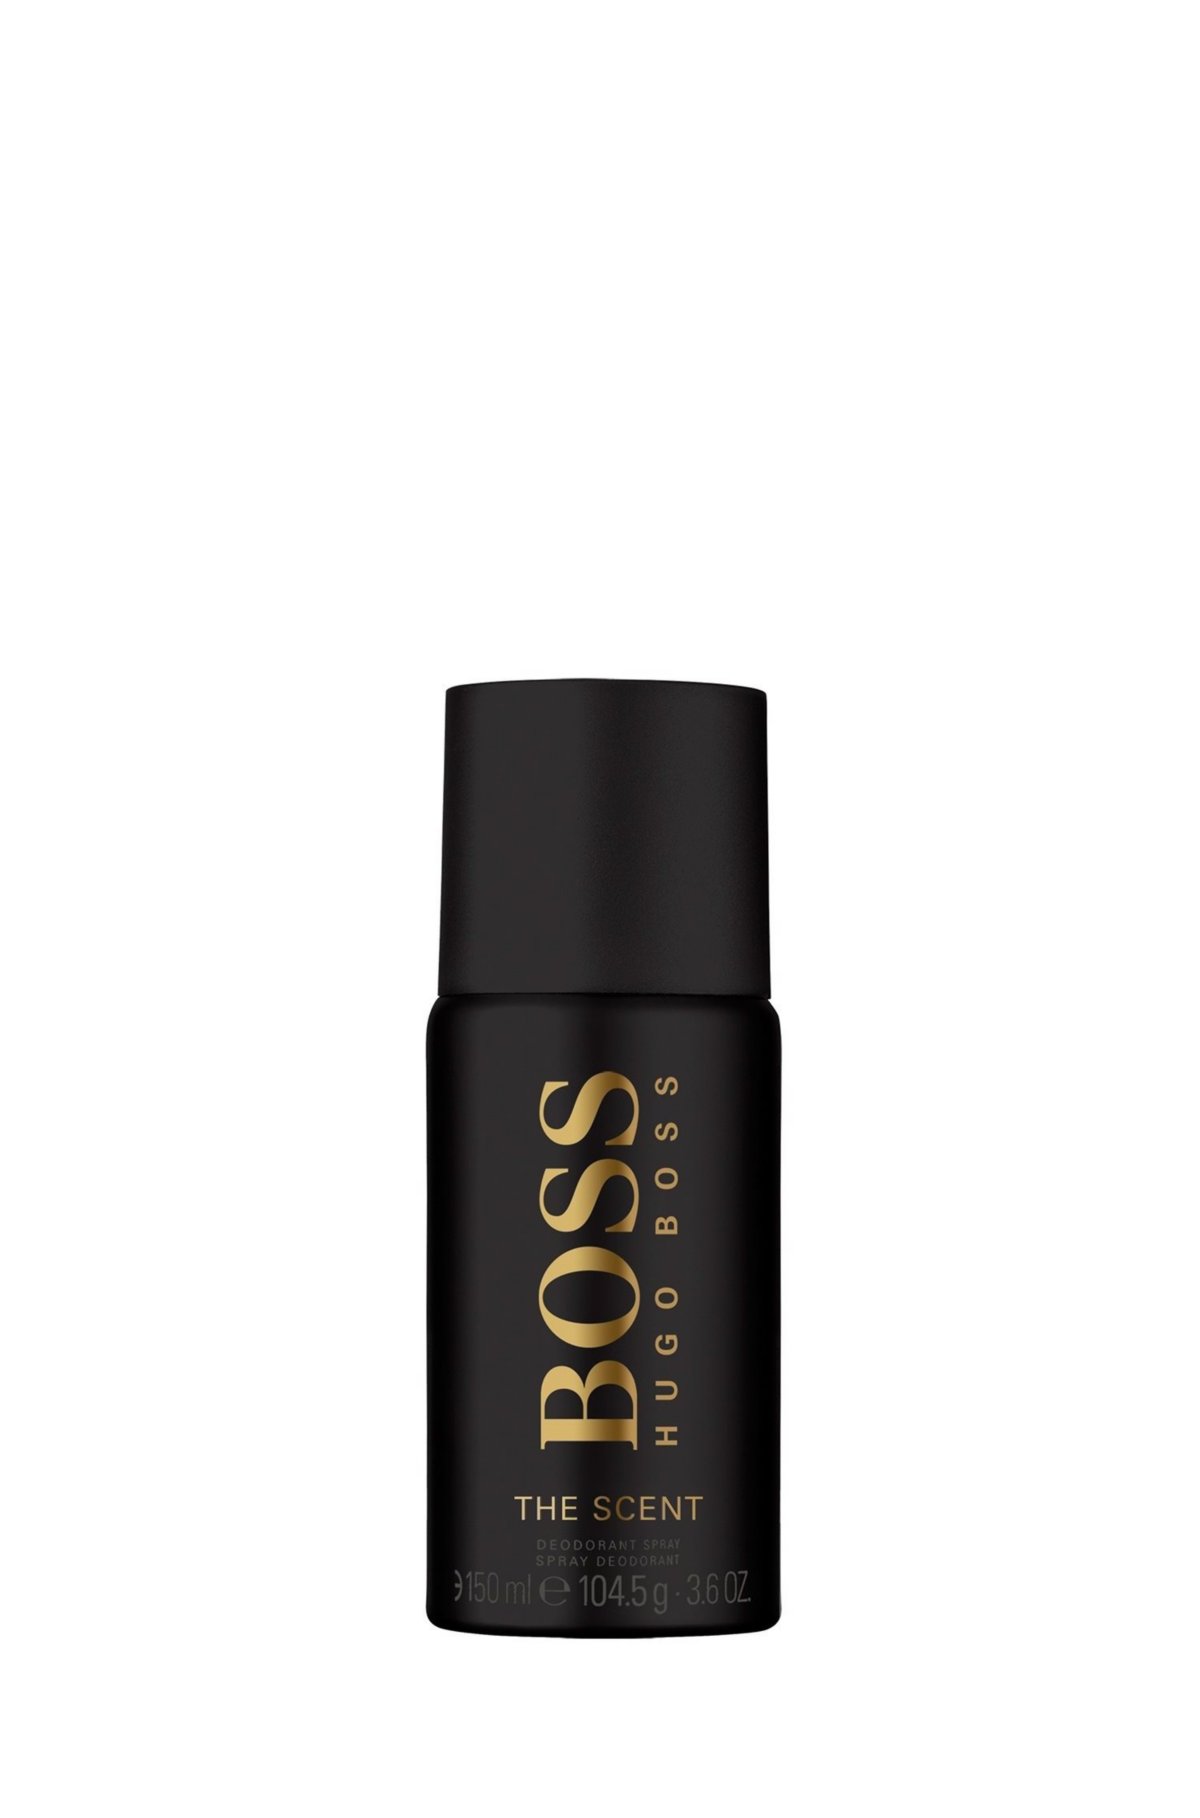 BOSS The Scent deodorant spray 150ml, Assorted-Pre-Pack